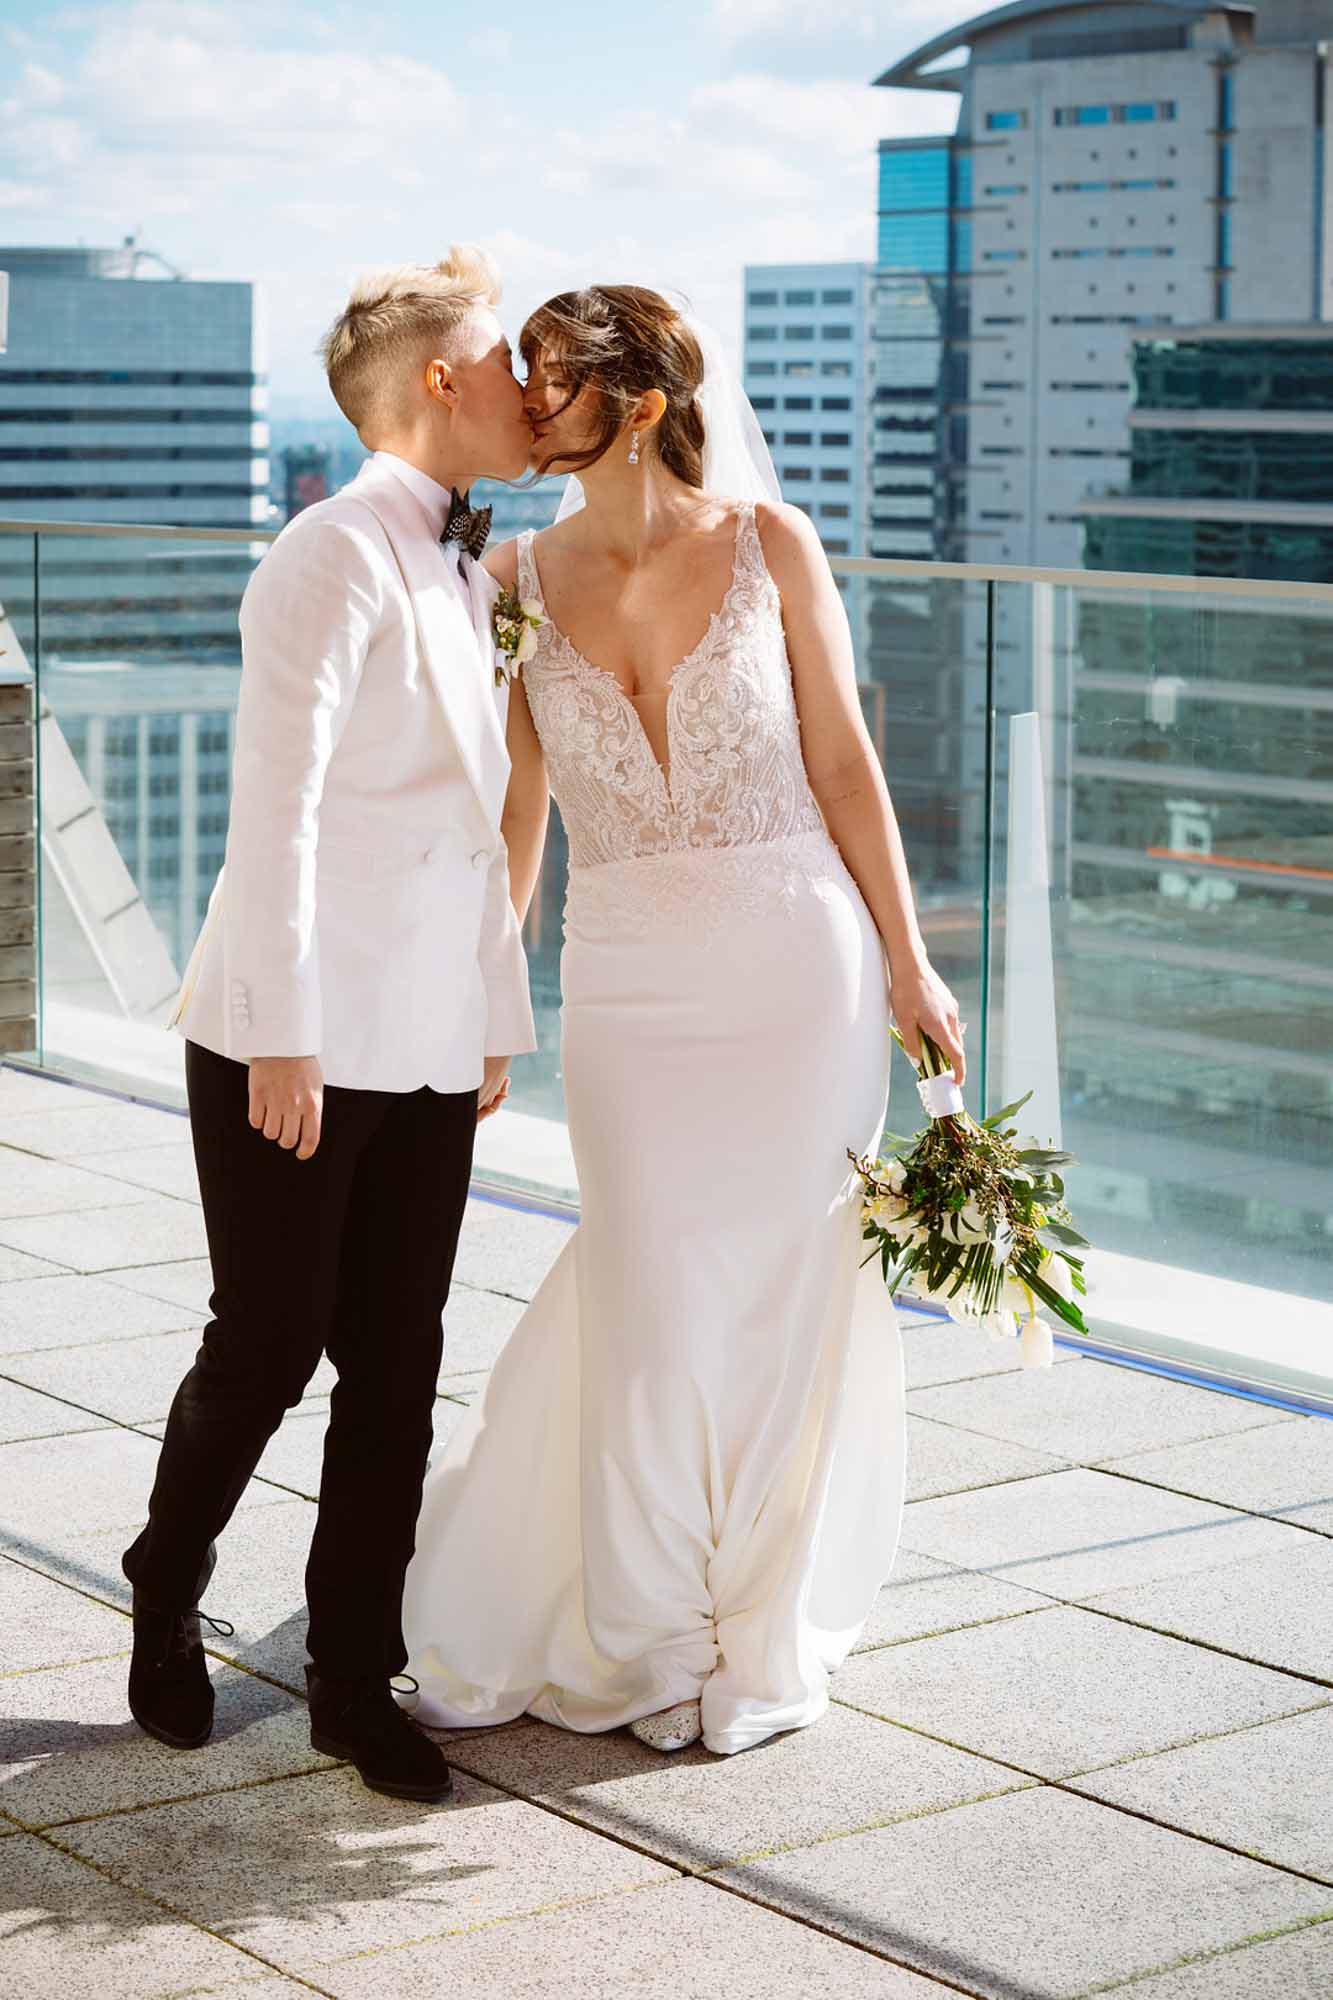 Portland elopement inspiration with city views, white florals and puppy love | Jessica Hill Photography | Featured on Equally Wed, the leading LGBTQ+ wedding magazine